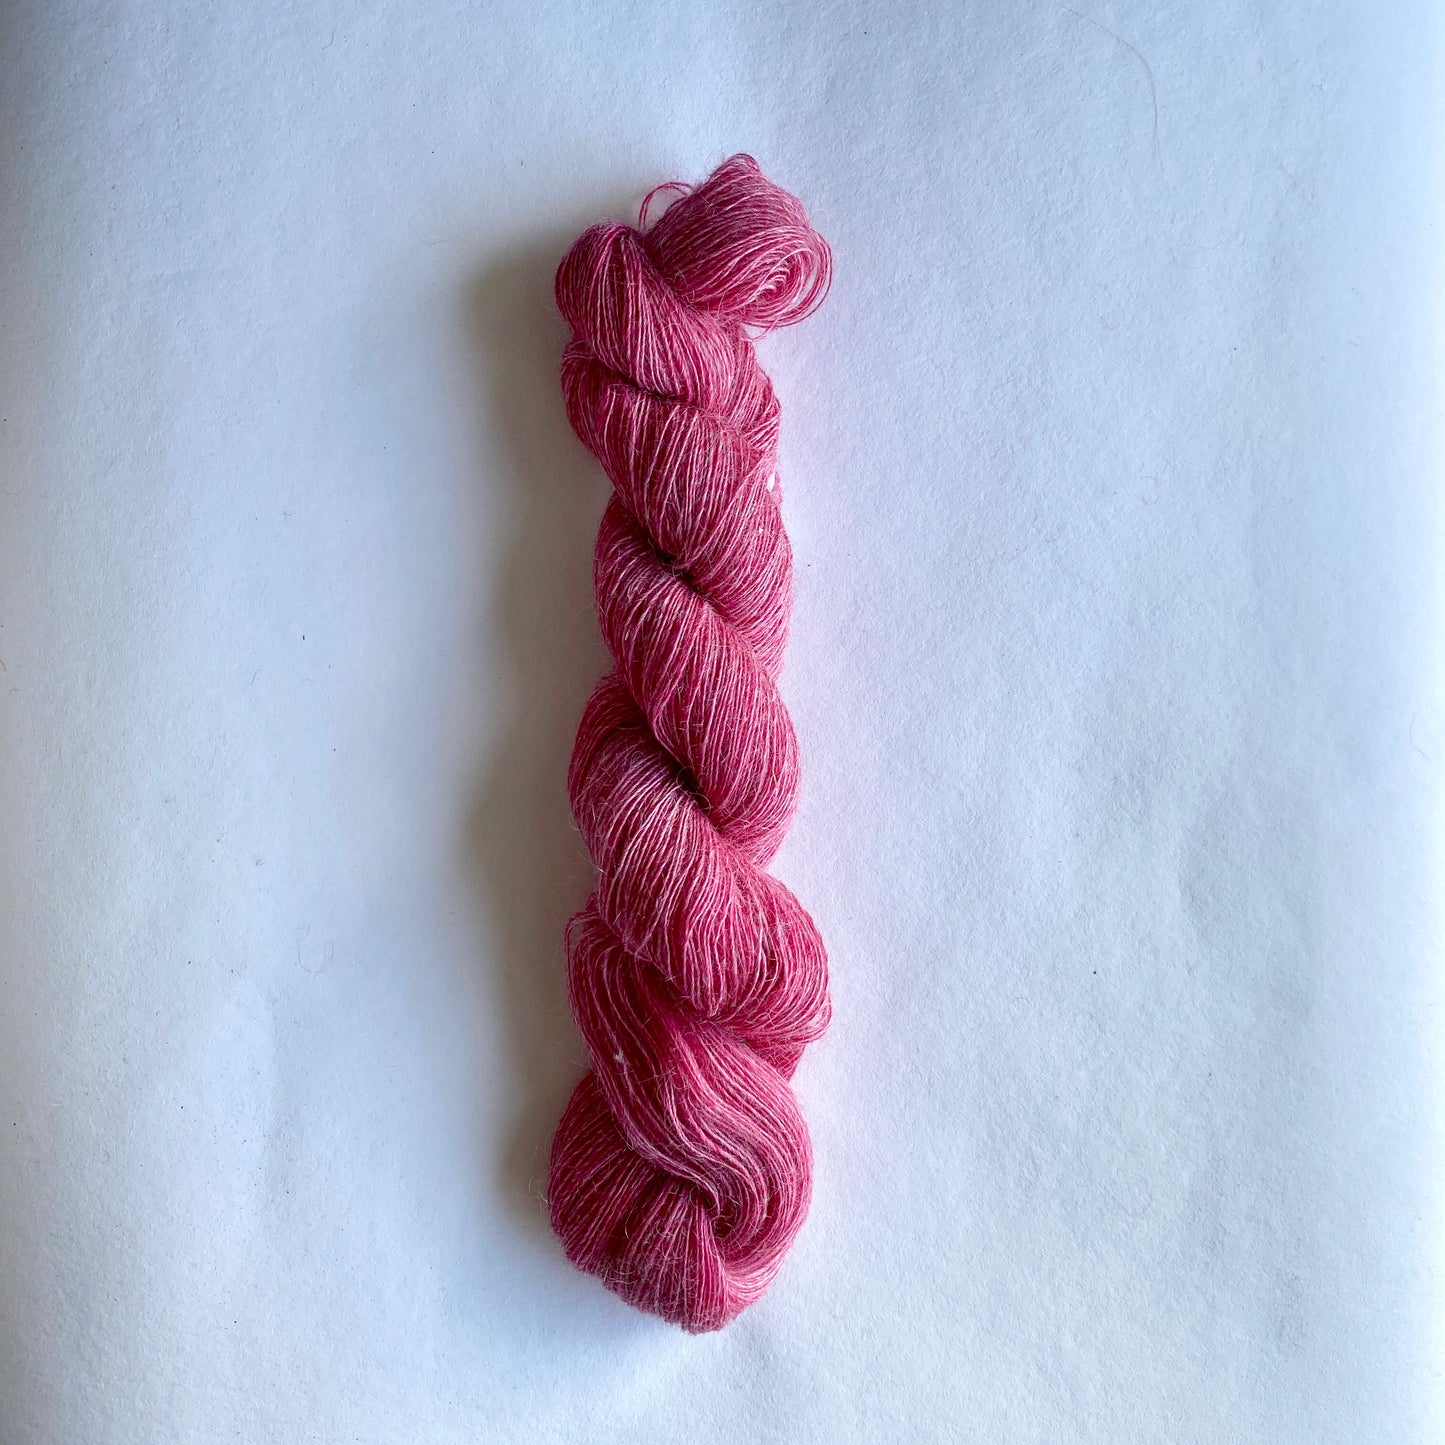 FIVREL NORSK MOHAIR (50 g) F242 LYS ROSA